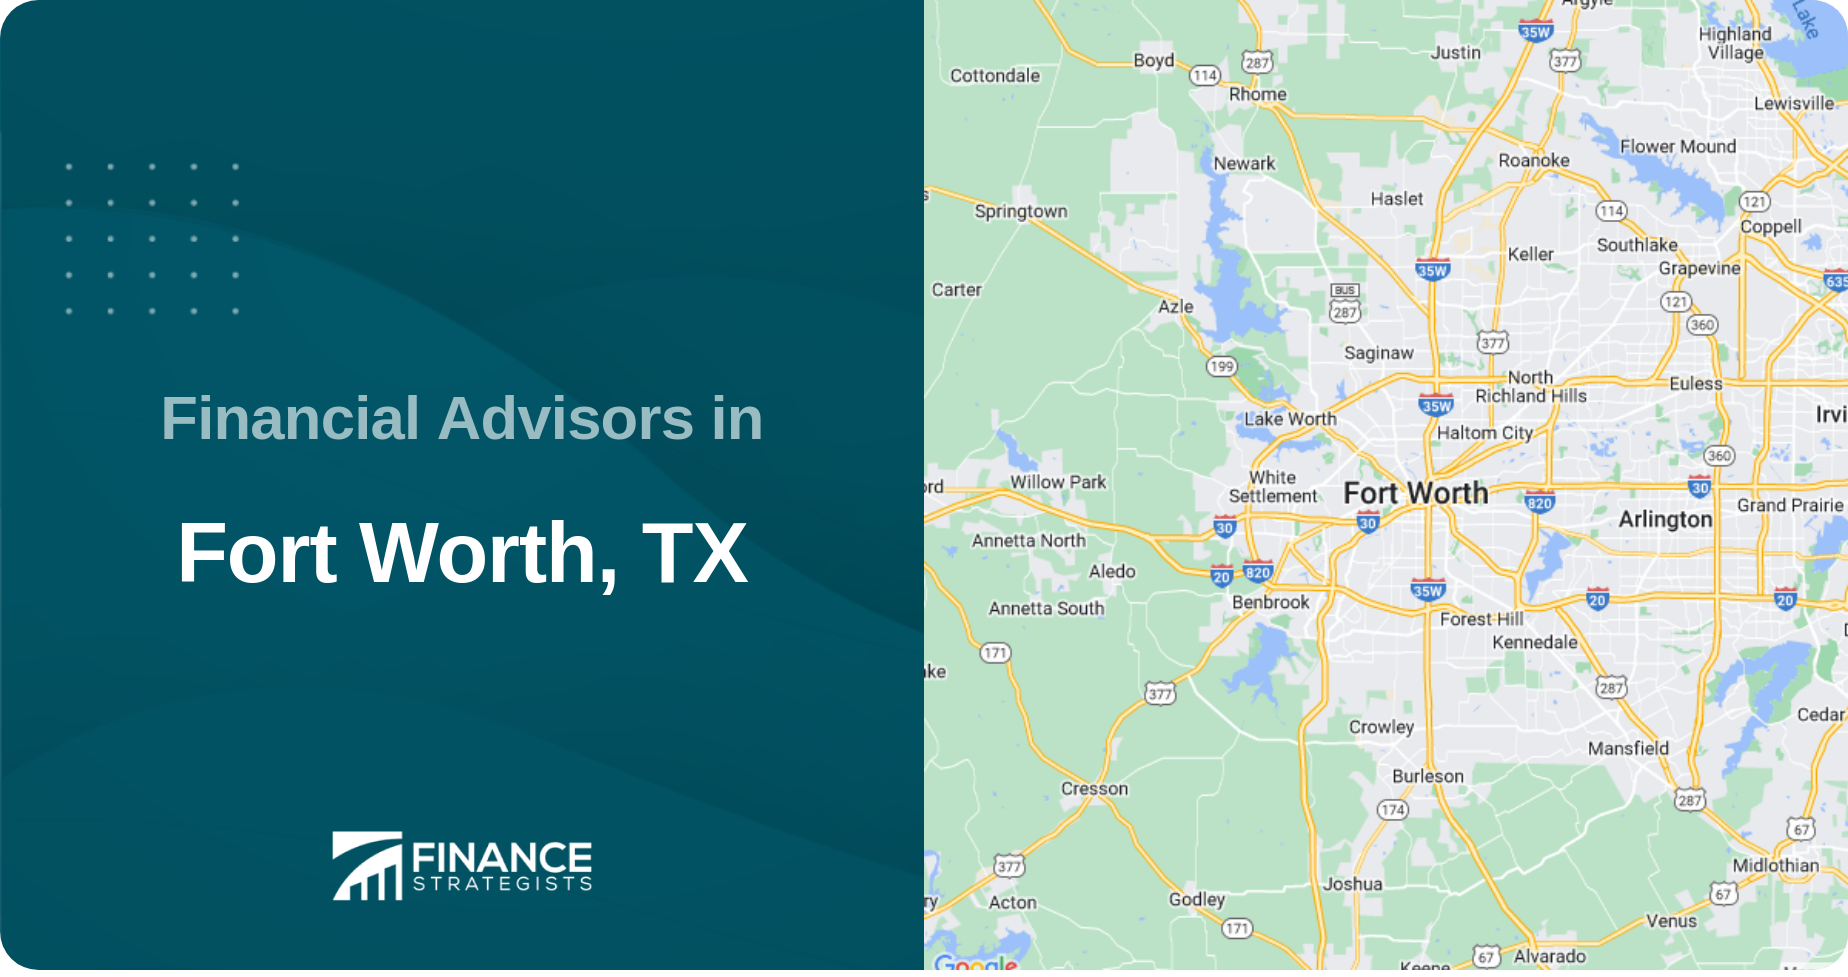 Financial Advisors in Fort Worth, TX